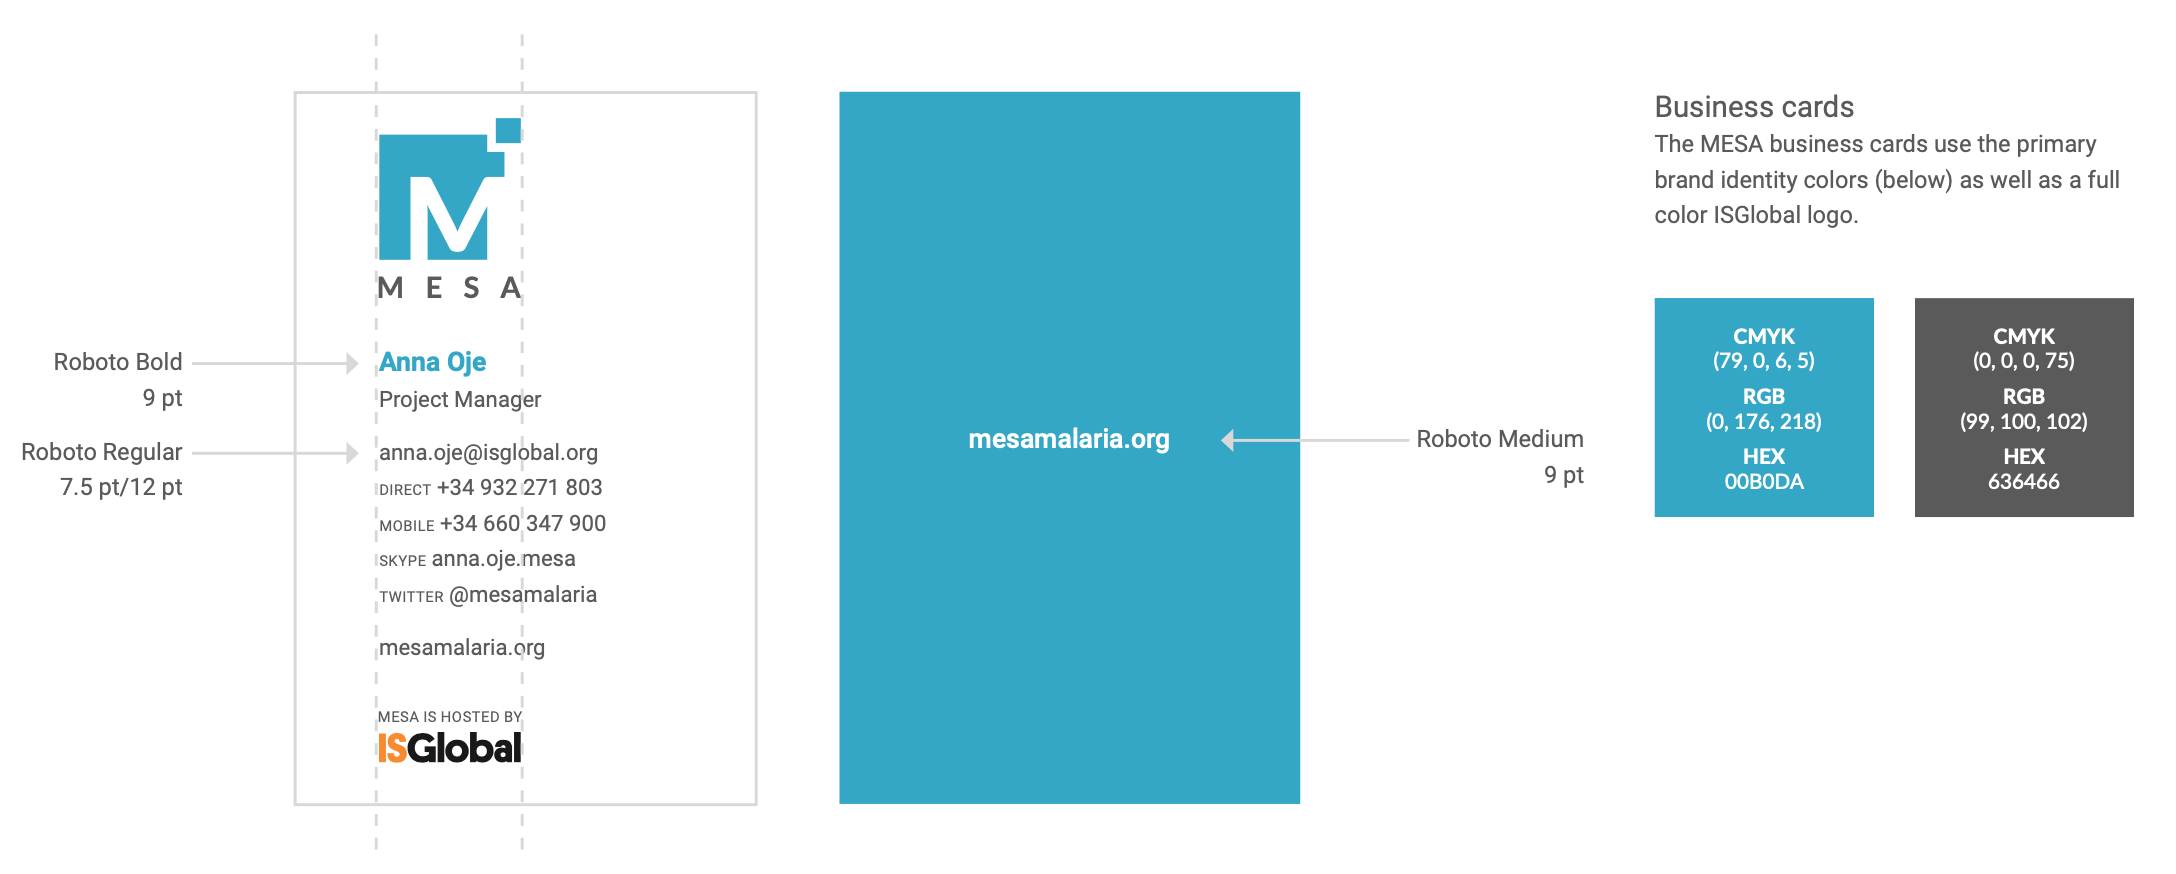 An excerpt from the brand guide Graphicacy built for MESA